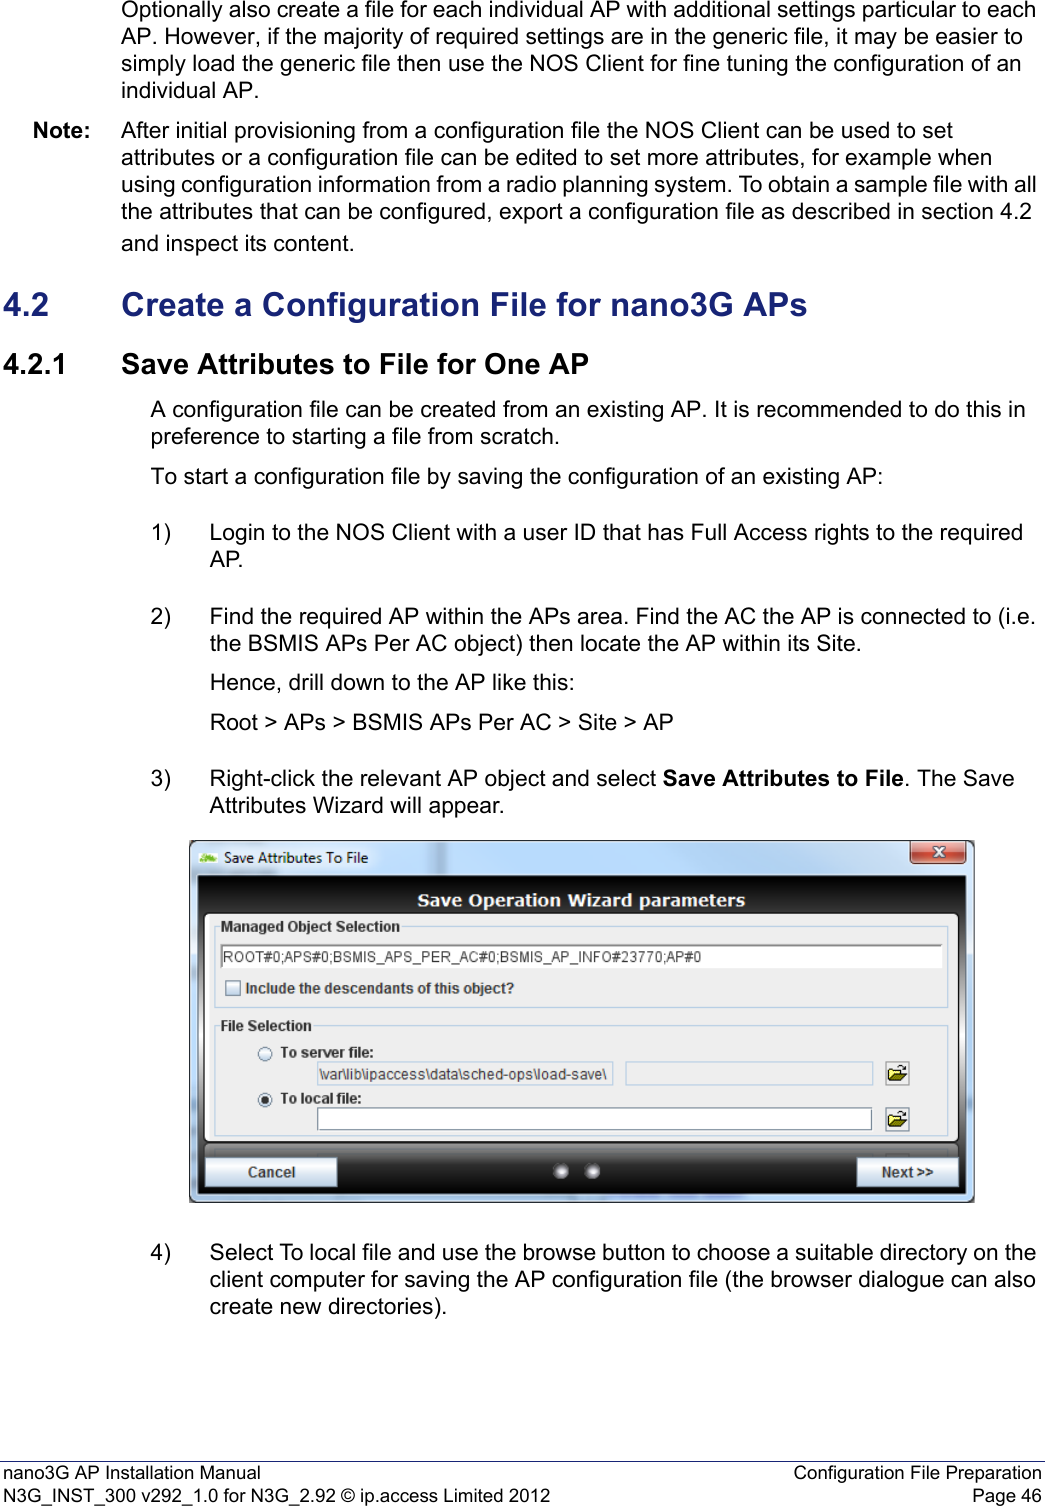 nano3G AP Installation Manual Configuration File PreparationN3G_INST_300 v292_1.0 for N3G_2.92 © ip.access Limited 2012 Page 46Optionally also create a file for each individual AP with additional settings particular to each AP. However, if the majority of required settings are in the generic file, it may be easier to simply load the generic file then use the NOS Client for fine tuning the configuration of an individual AP.Note: After initial provisioning from a configuration file the NOS Client can be used to set attributes or a configuration file can be edited to set more attributes, for example when using configuration information from a radio planning system. To obtain a sample file with all the attributes that can be configured, export a configuration file as described in section 4.2 and inspect its content.4.2 Create a Configuration File for nano3G APs4.2.1 Save Attributes to File for One APA configuration file can be created from an existing AP. It is recommended to do this in preference to starting a file from scratch.To start a configuration file by saving the configuration of an existing AP:1) Login to the NOS Client with a user ID that has Full Access rights to the required AP.2) Find the required AP within the APs area. Find the AC the AP is connected to (i.e. the BSMIS APs Per AC object) then locate the AP within its Site. Hence, drill down to the AP like this:Root &gt; APs &gt; BSMIS APs Per AC &gt; Site &gt; AP3) Right-click the relevant AP object and select Save Attributes to File. The Save Attributes Wizard will appear.4) Select To local file and use the browse button to choose a suitable directory on the client computer for saving the AP configuration file (the browser dialogue can also create new directories).